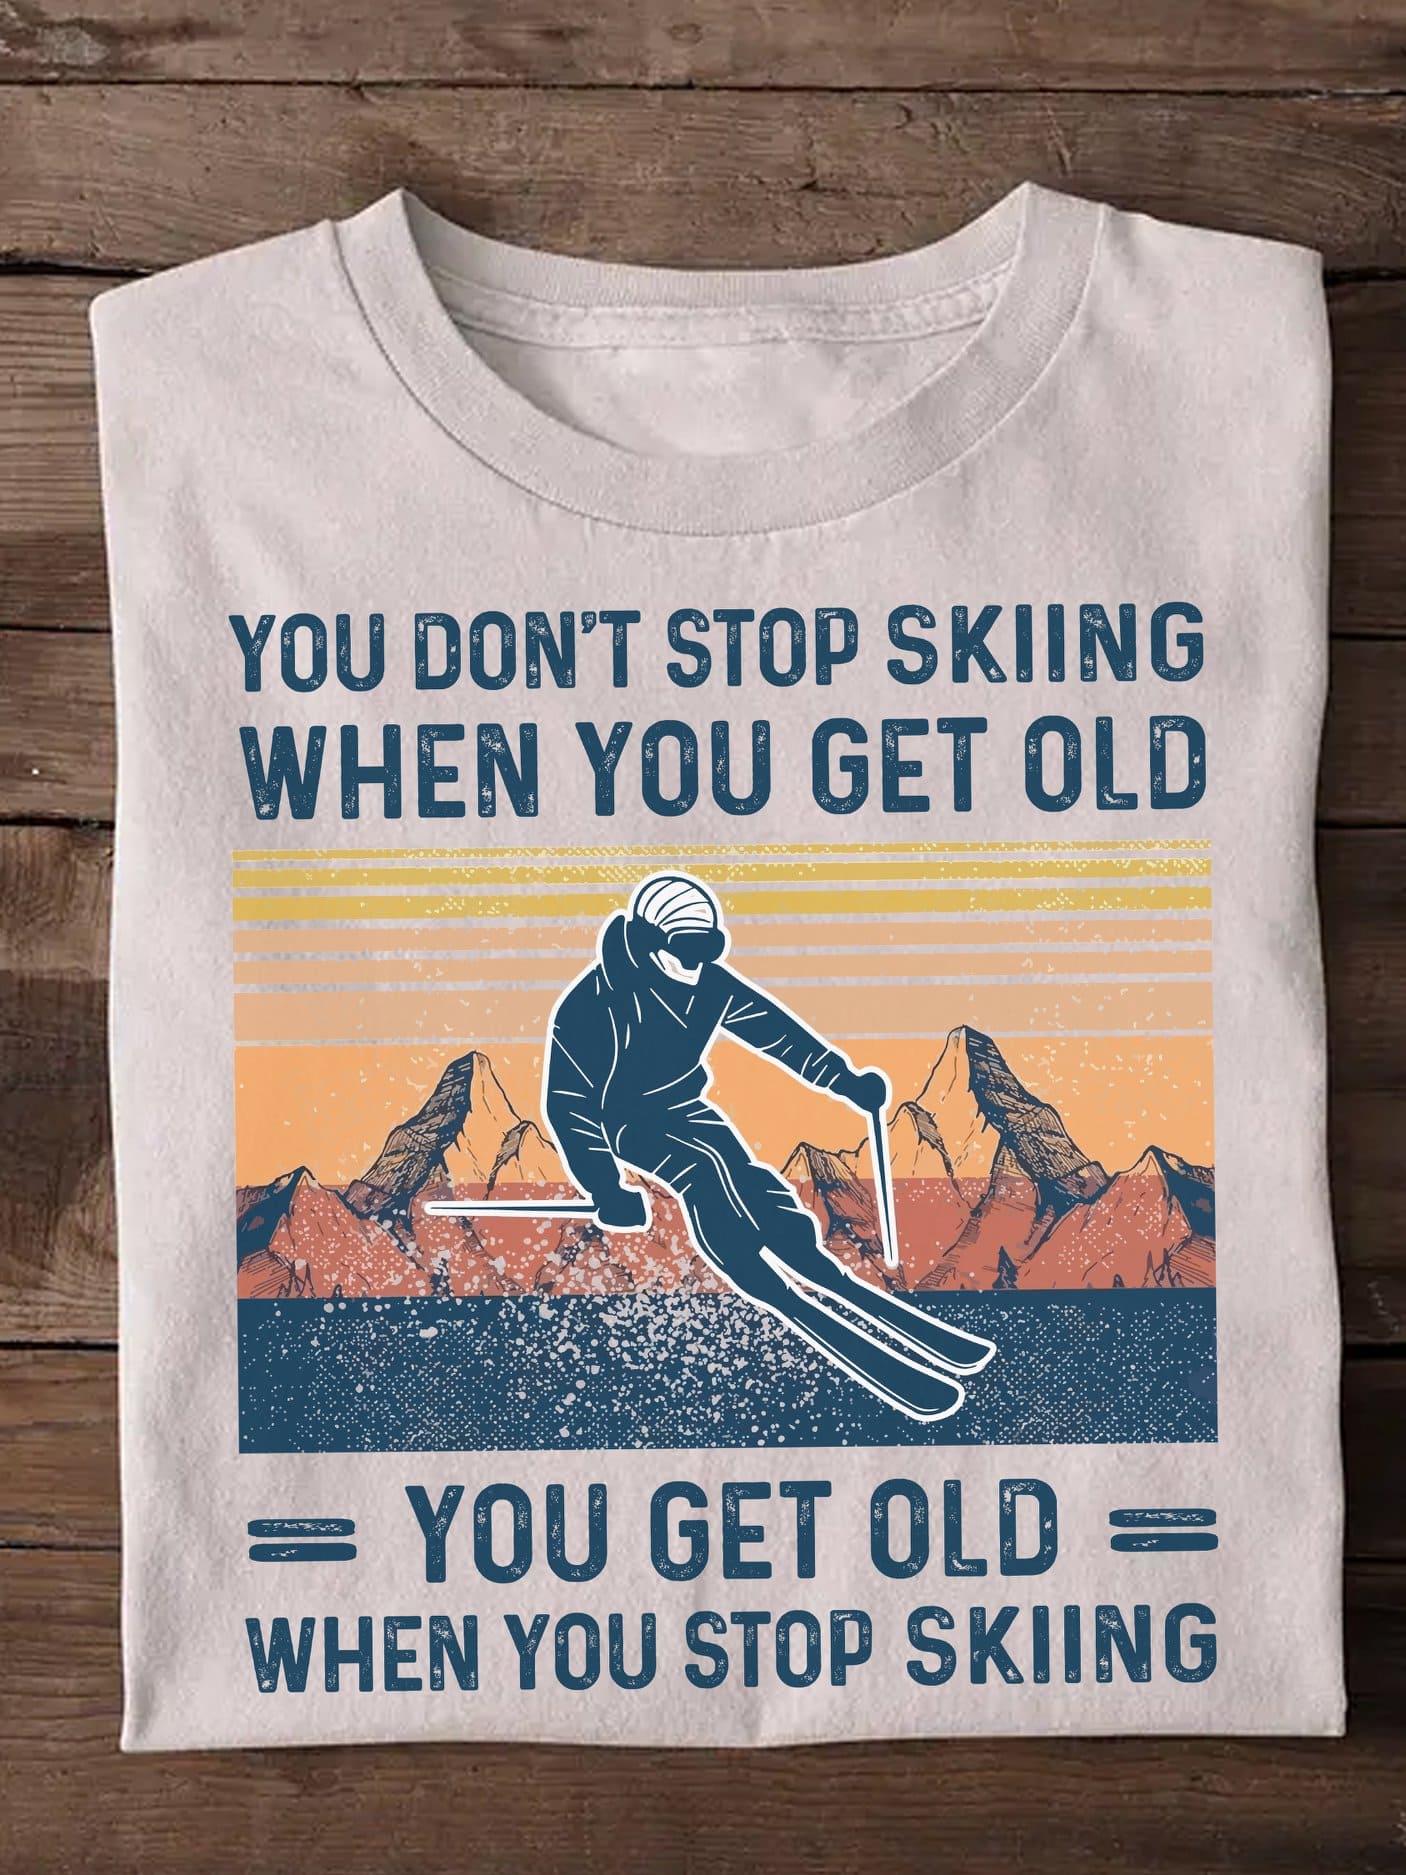 You don't stop skiing when you get old, you get old when you stop skiing - Skiing man, gift for skiers